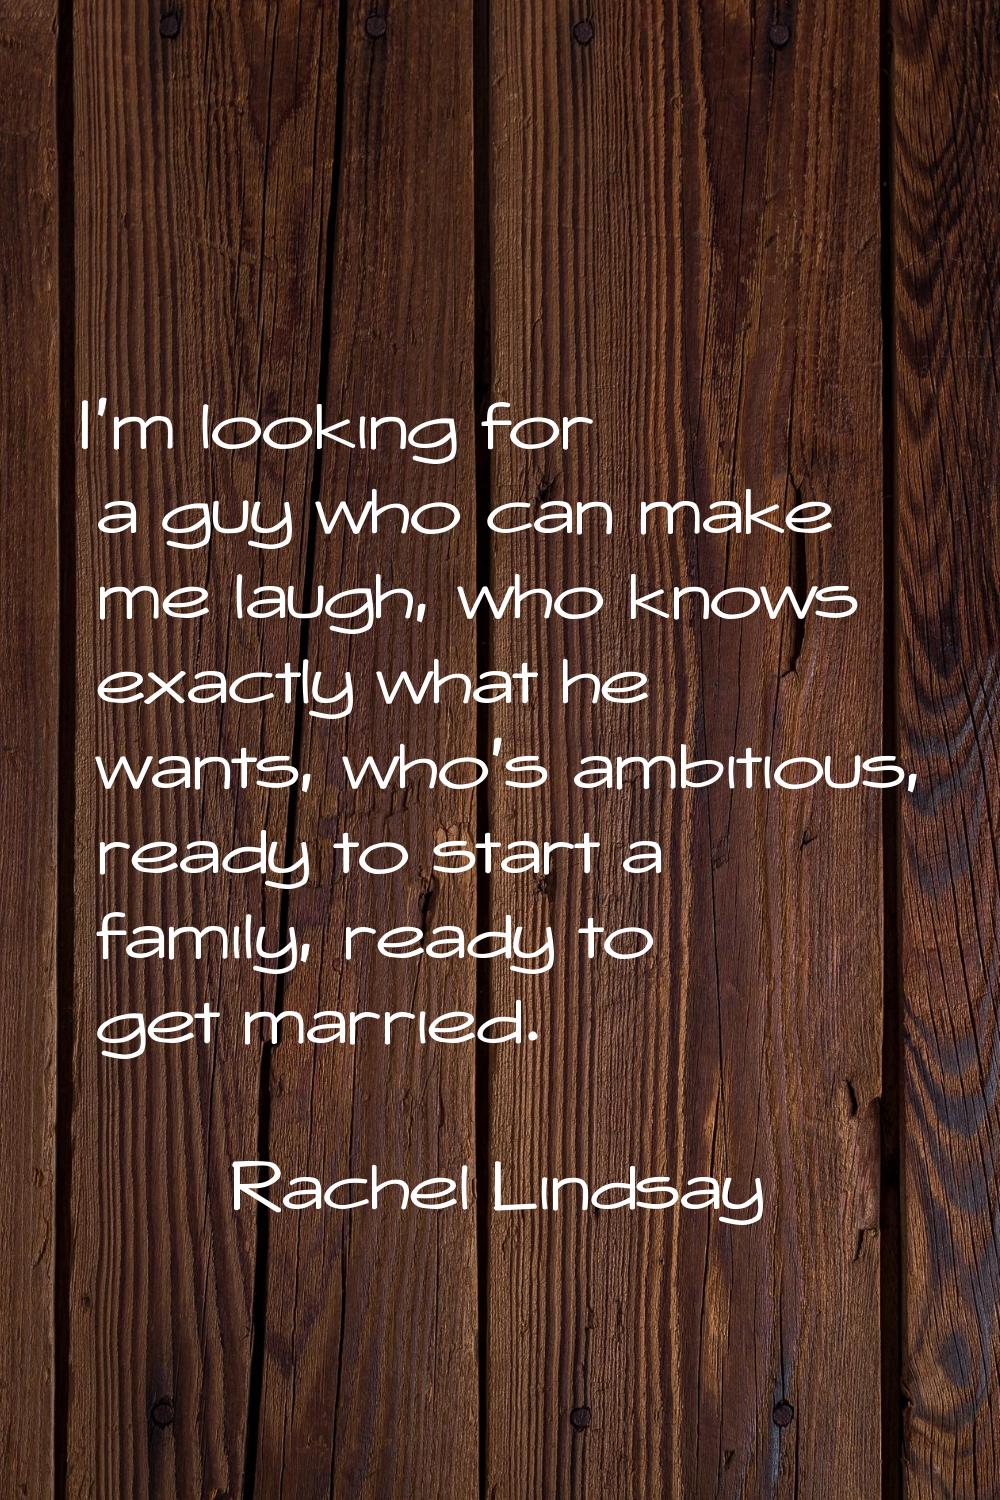 I'm looking for a guy who can make me laugh, who knows exactly what he wants, who's ambitious, read